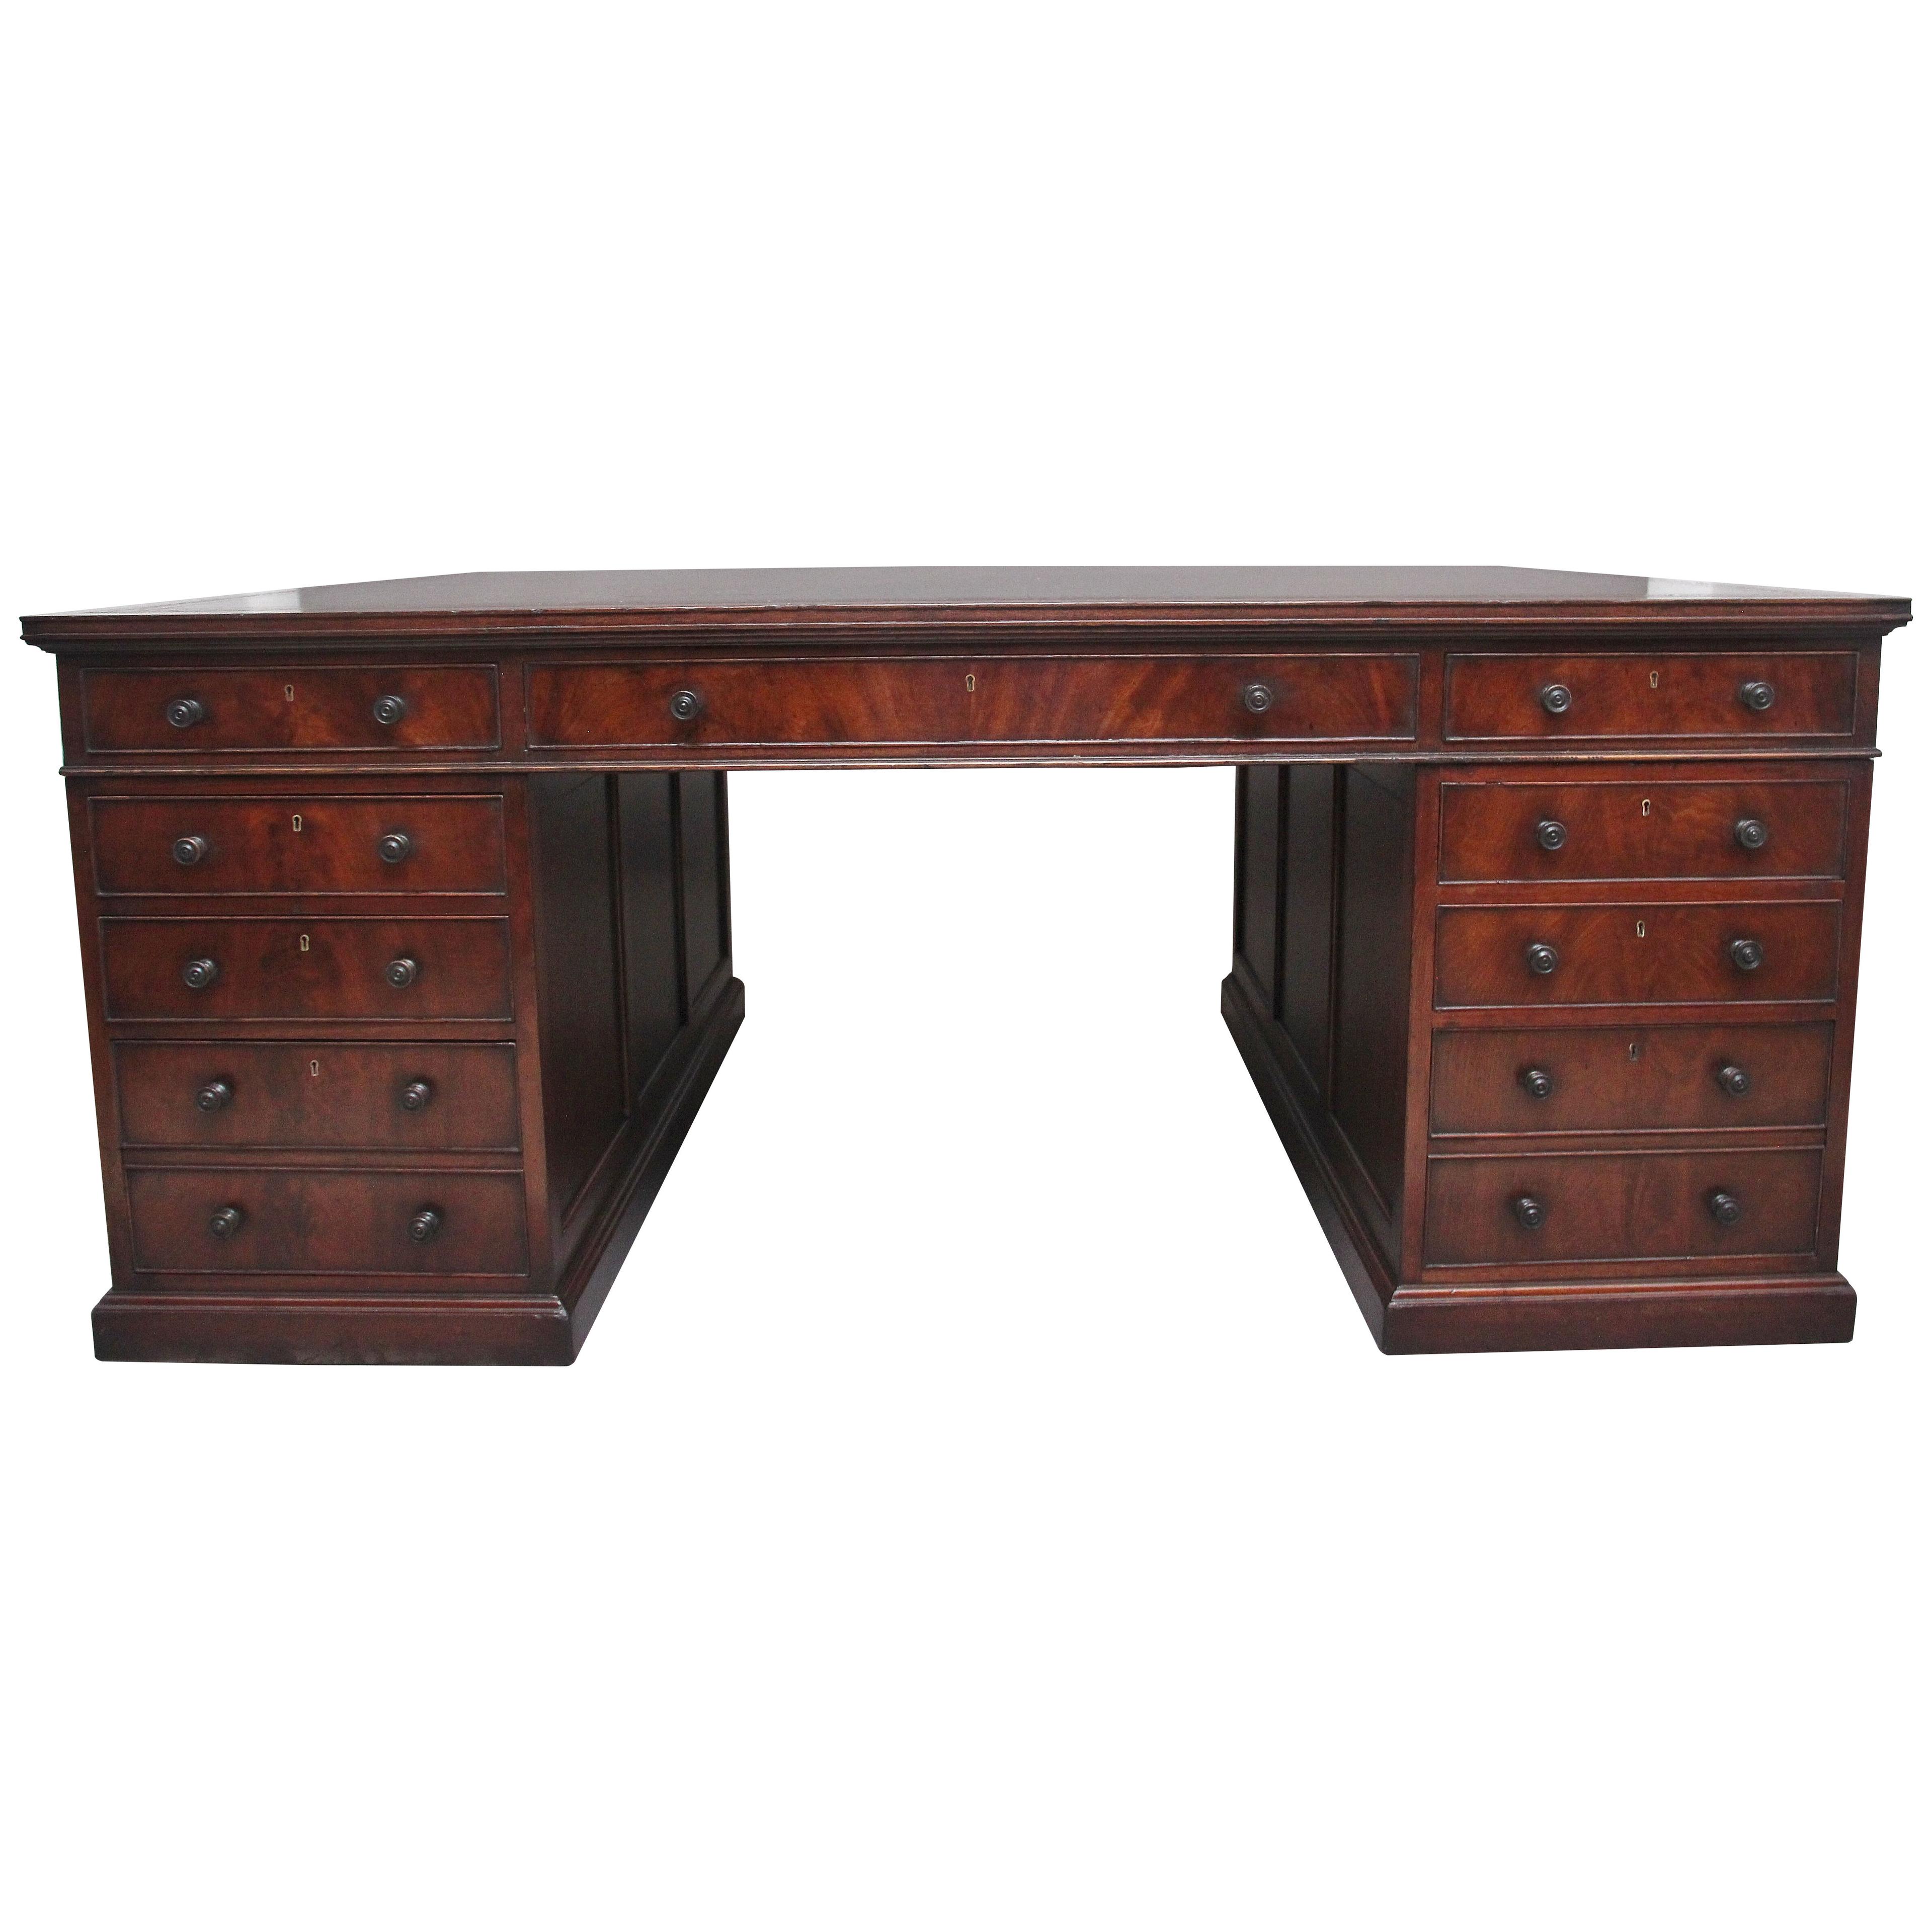 A large and impressive early 20th Century mahogany partners desk